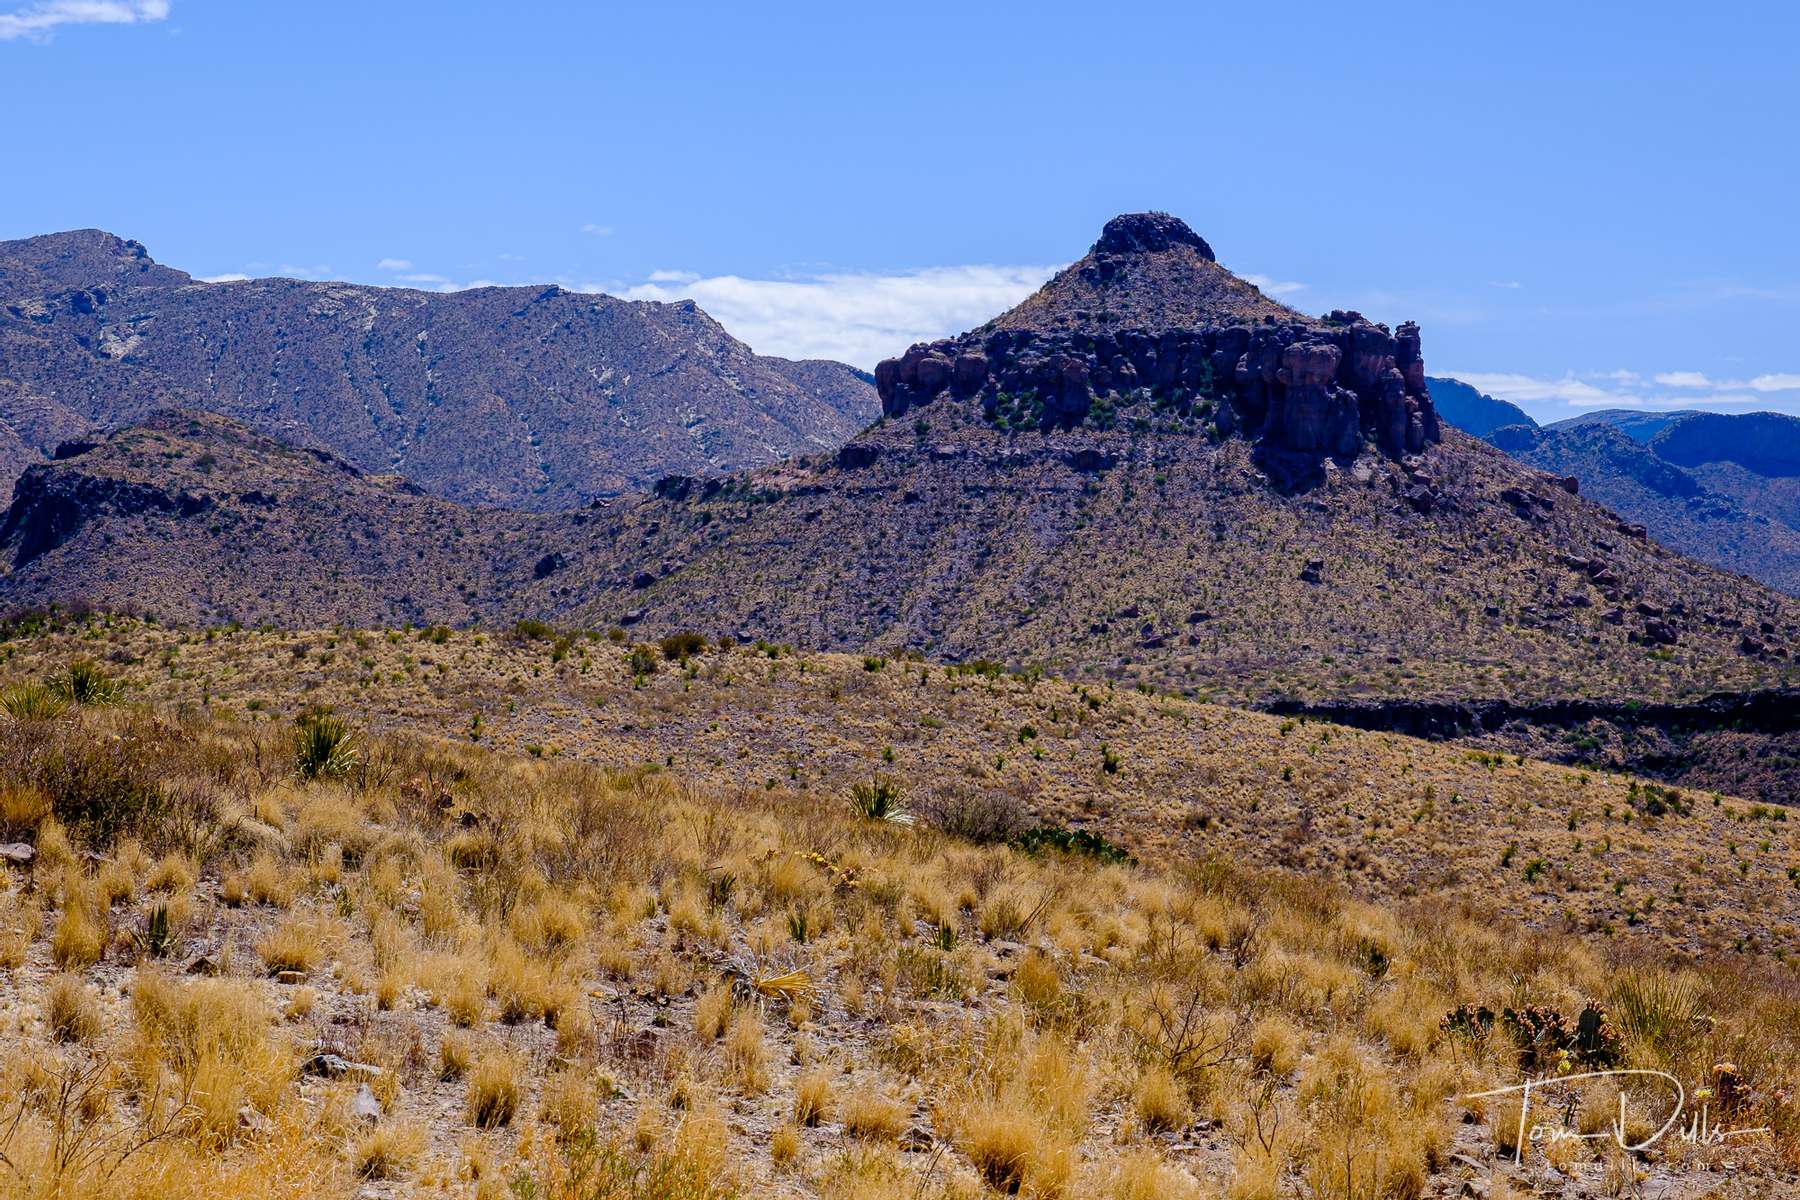 Views from the Sotol Vista Overlook at Big Bend National Park in Texas